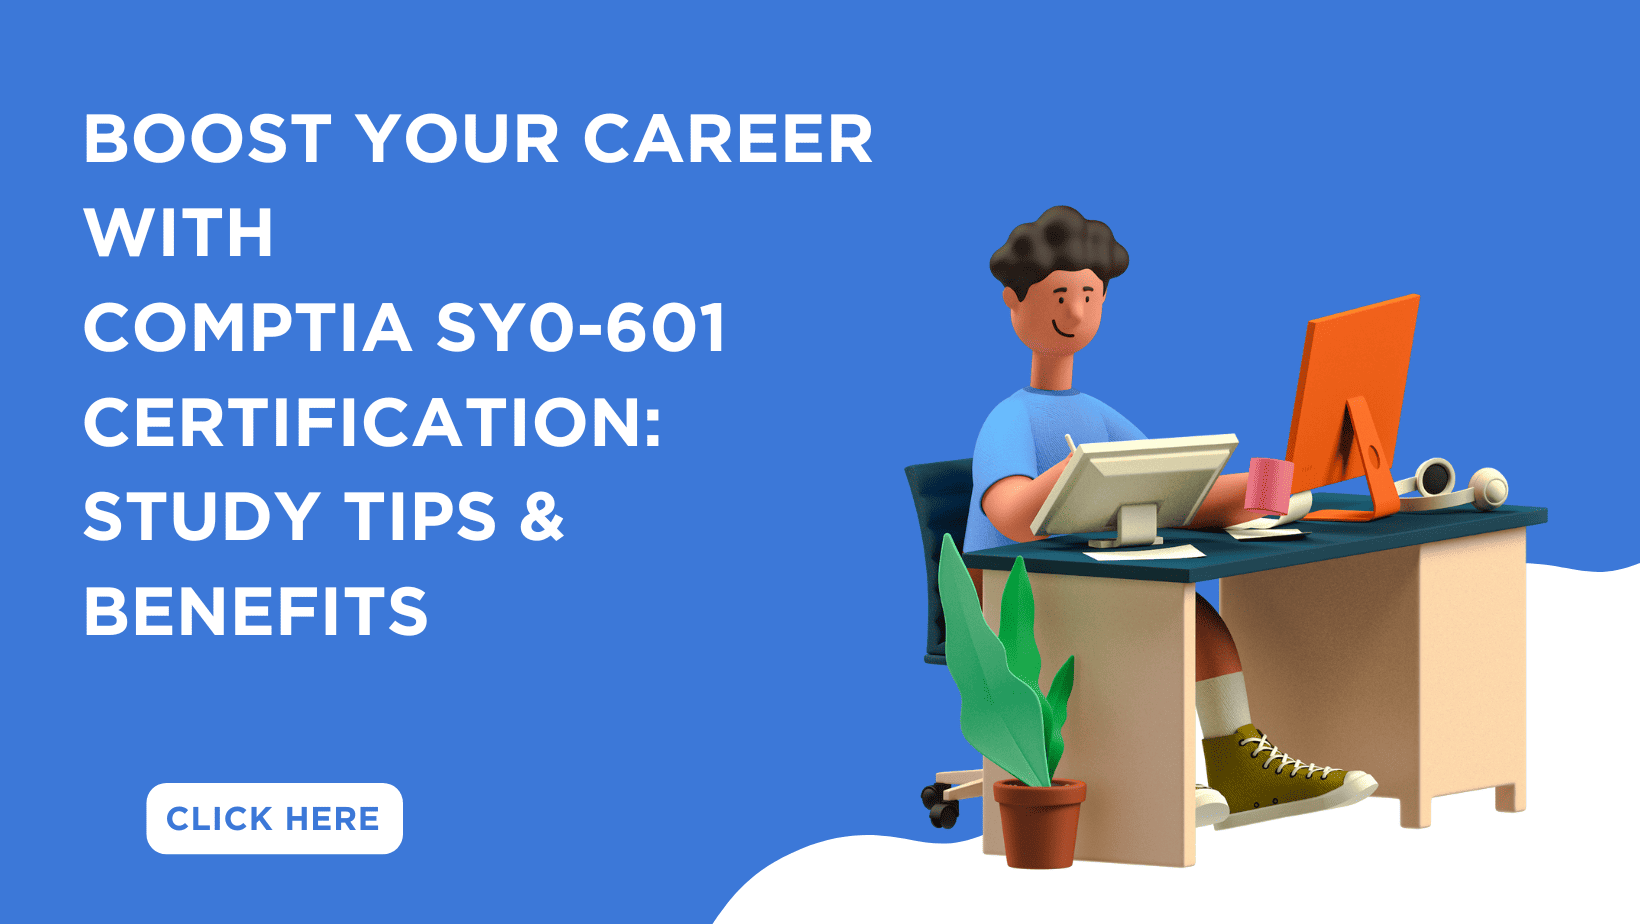 Enhance your SY0-601 Security+ exam prep with valuable study tips & practice tests. Boost your IT career prospects with CompTIA certification.